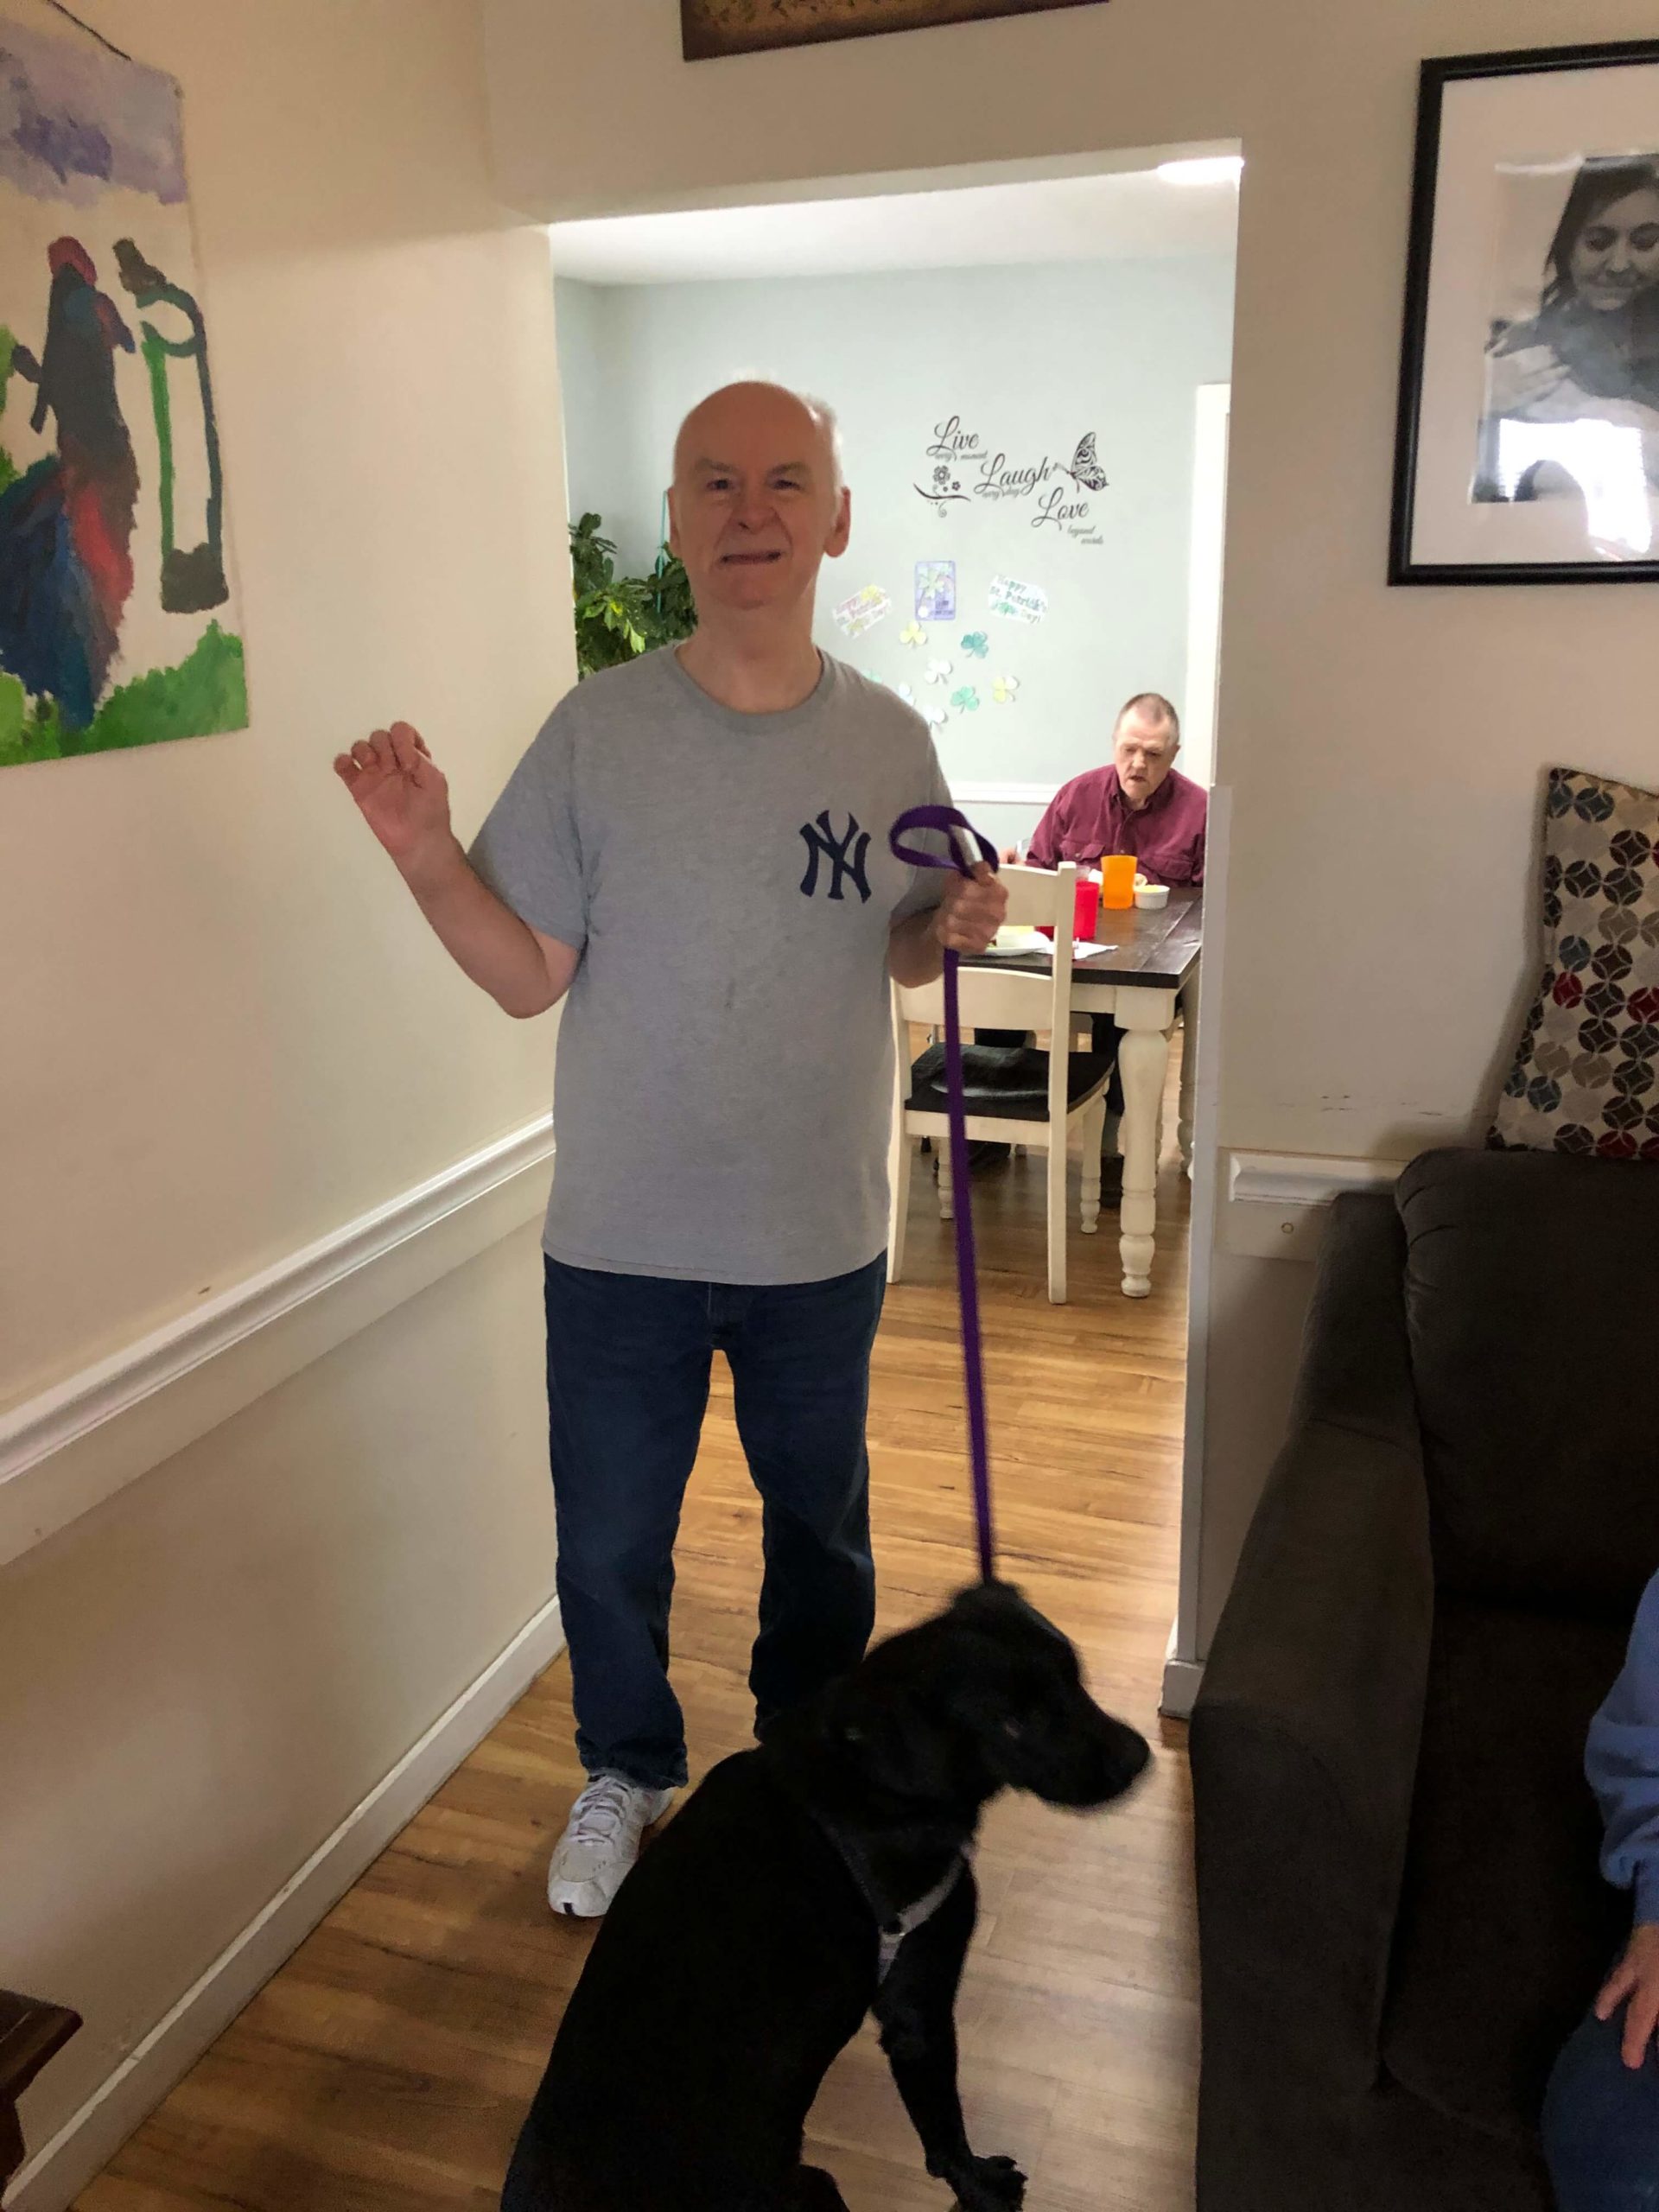 A man in a gray yankees t shirt hold the end of leash with a black dog attached to the other end. They are inside what appears to be a living room.